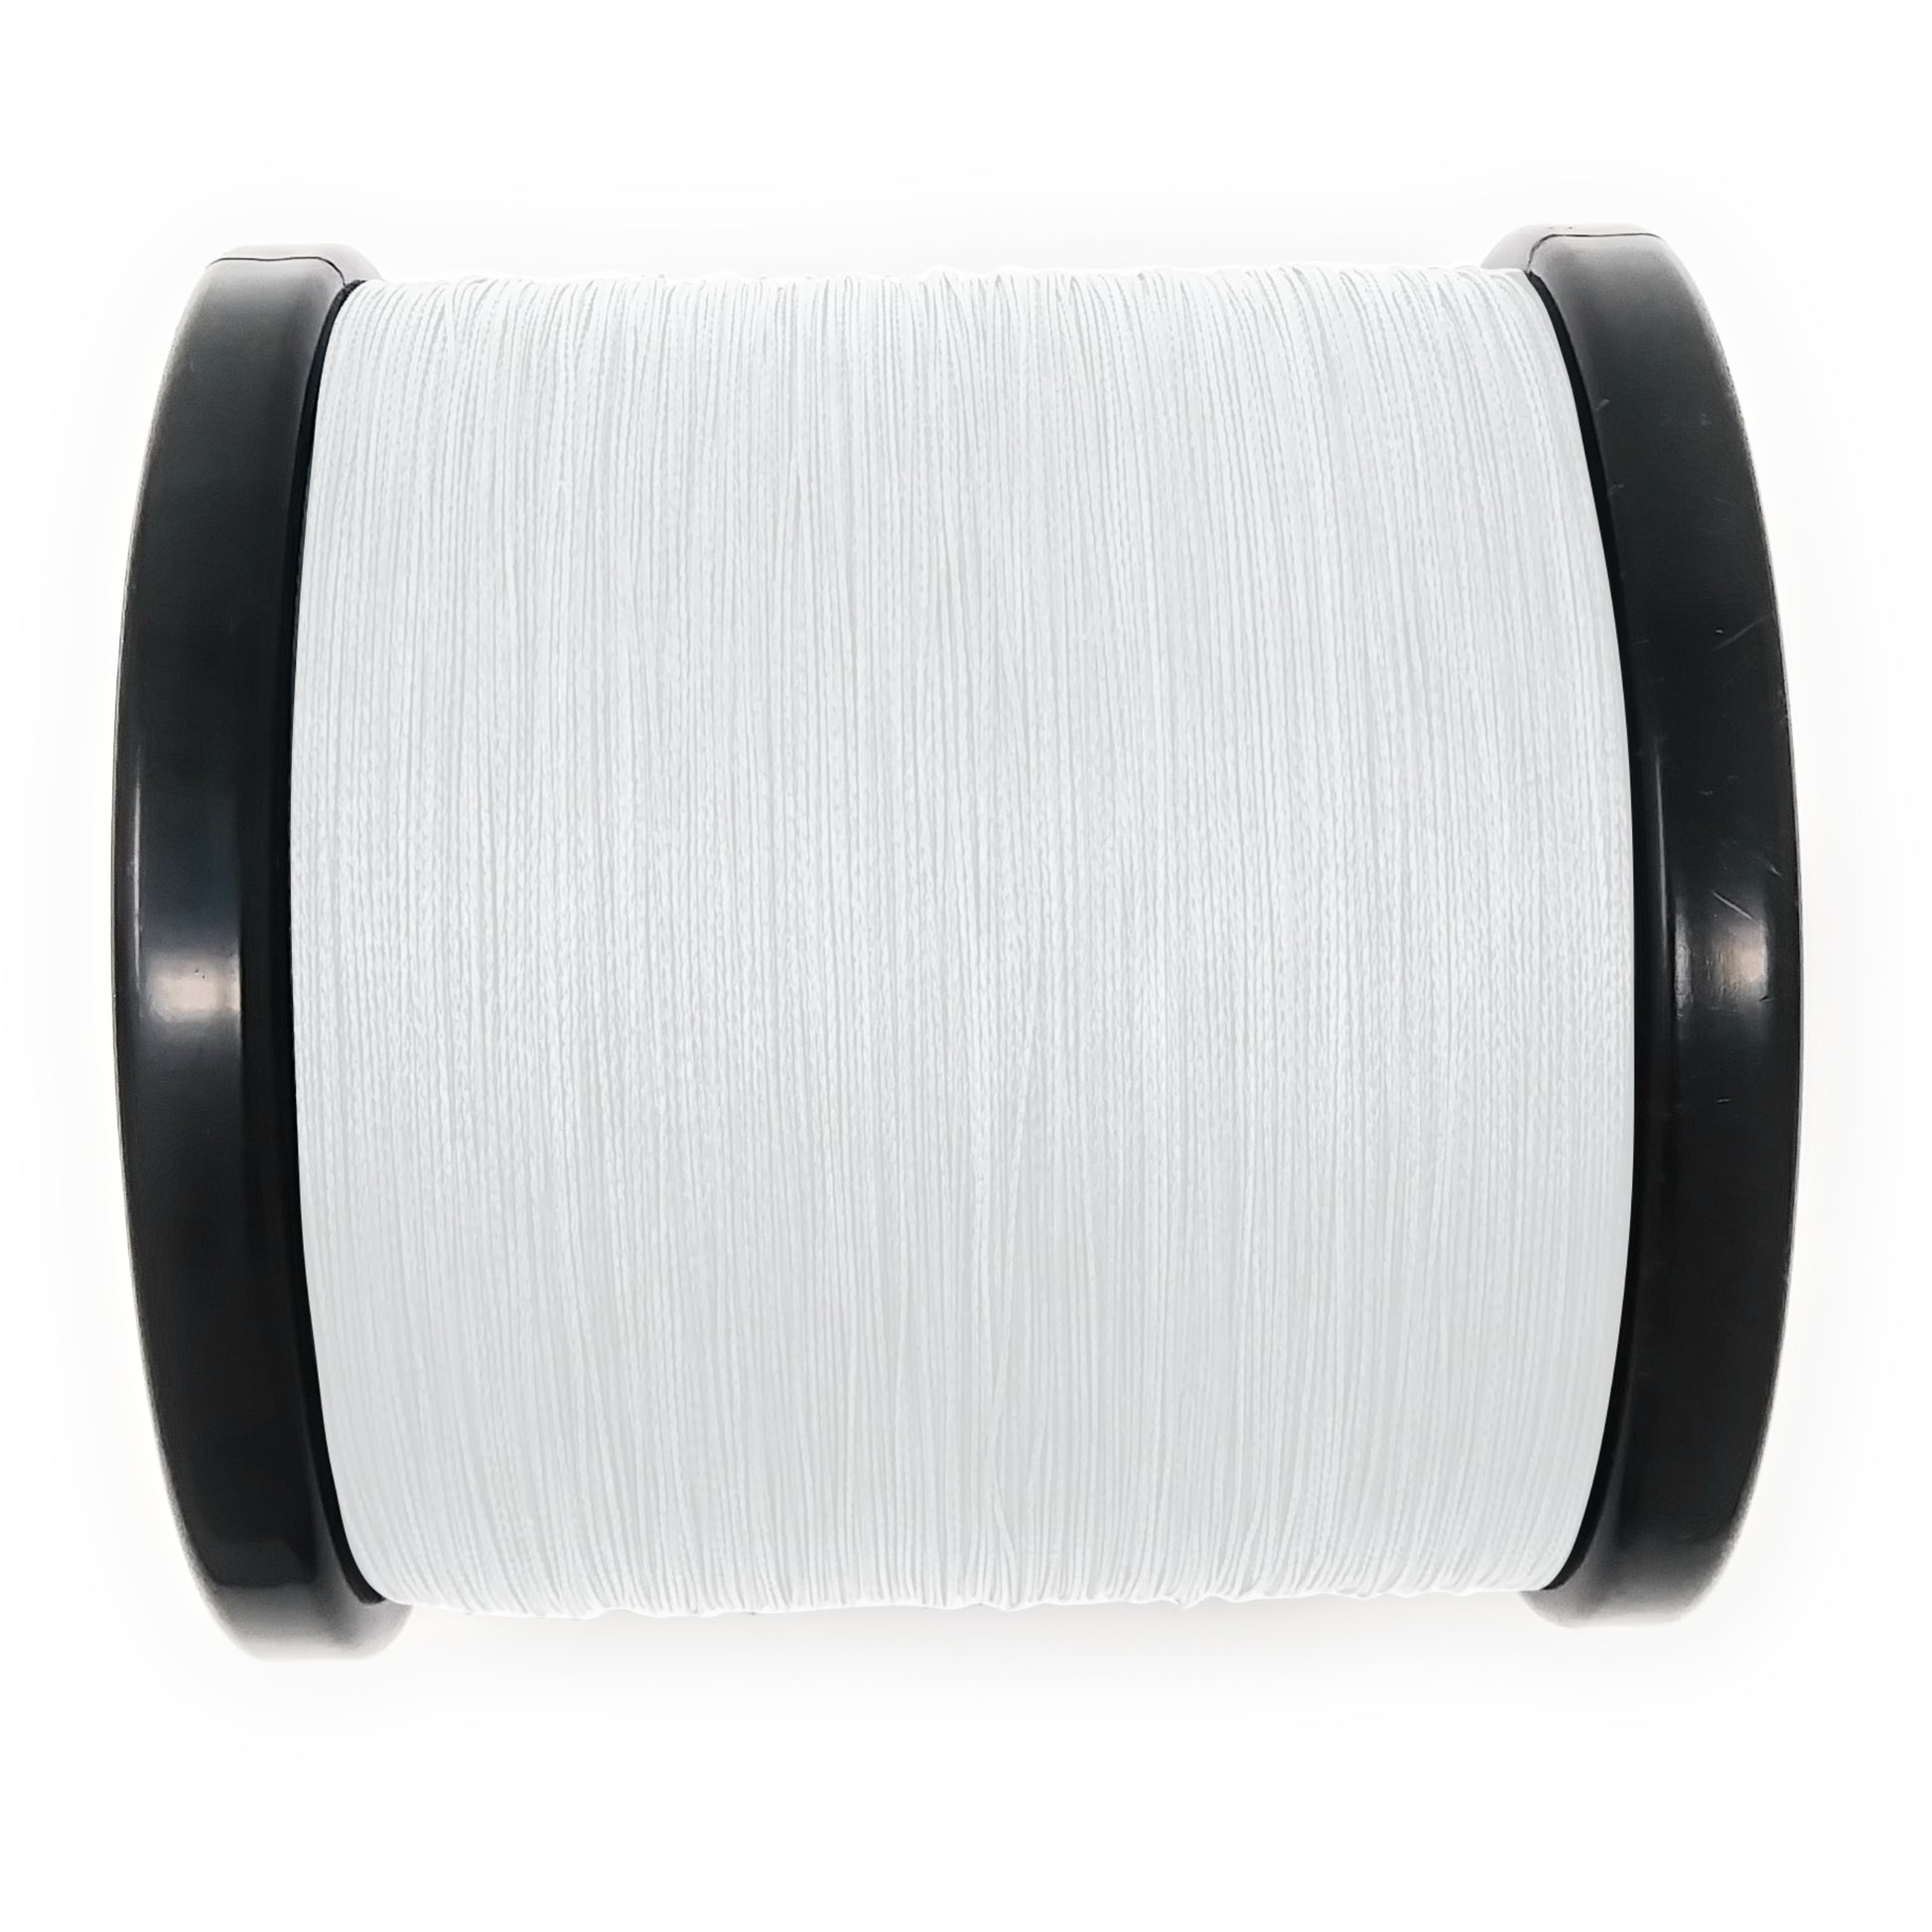 330Yard 6-100LB Fishing Line PE Braided Line Superline Spool Reaction  Tackle Power 5 Colors